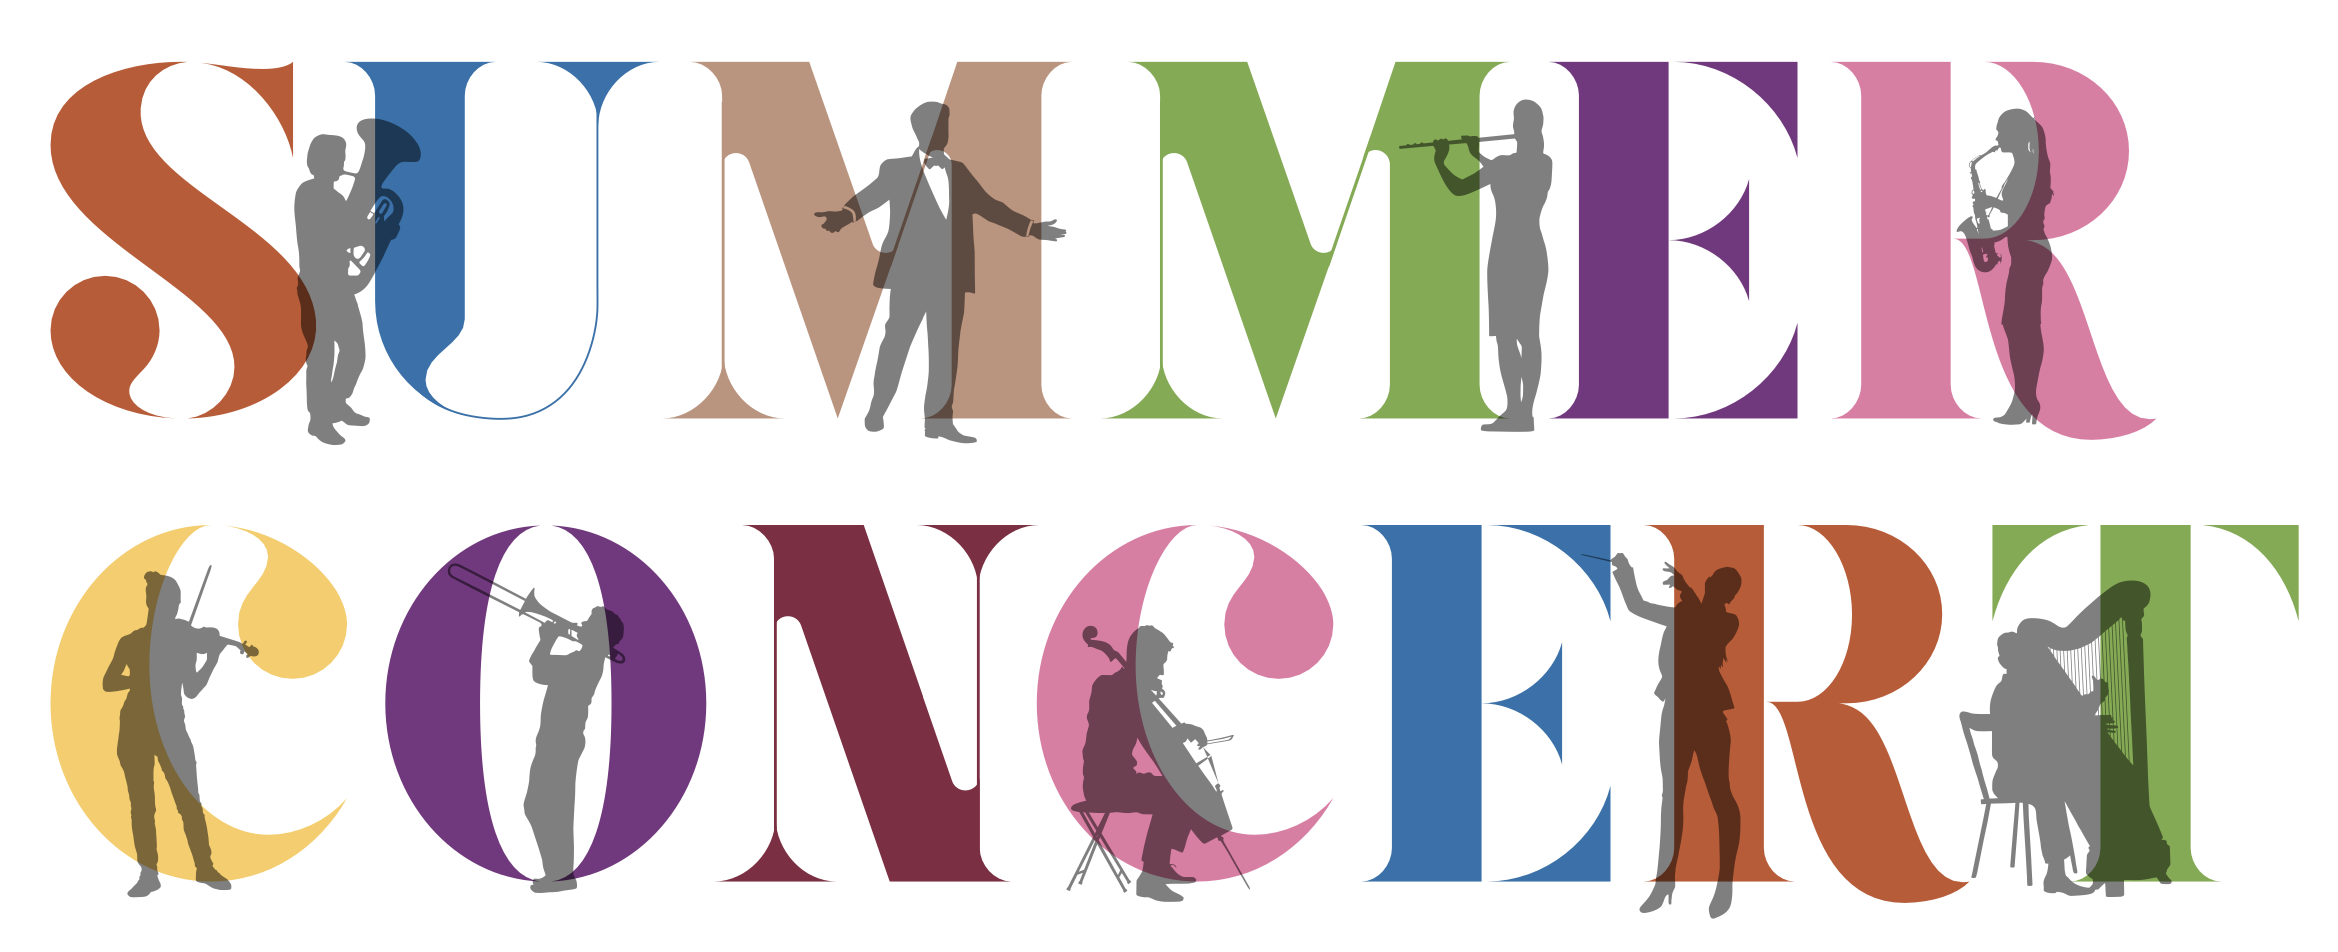 Colourful letters spelling "Summer Concert" featuring silhouette images of musicians